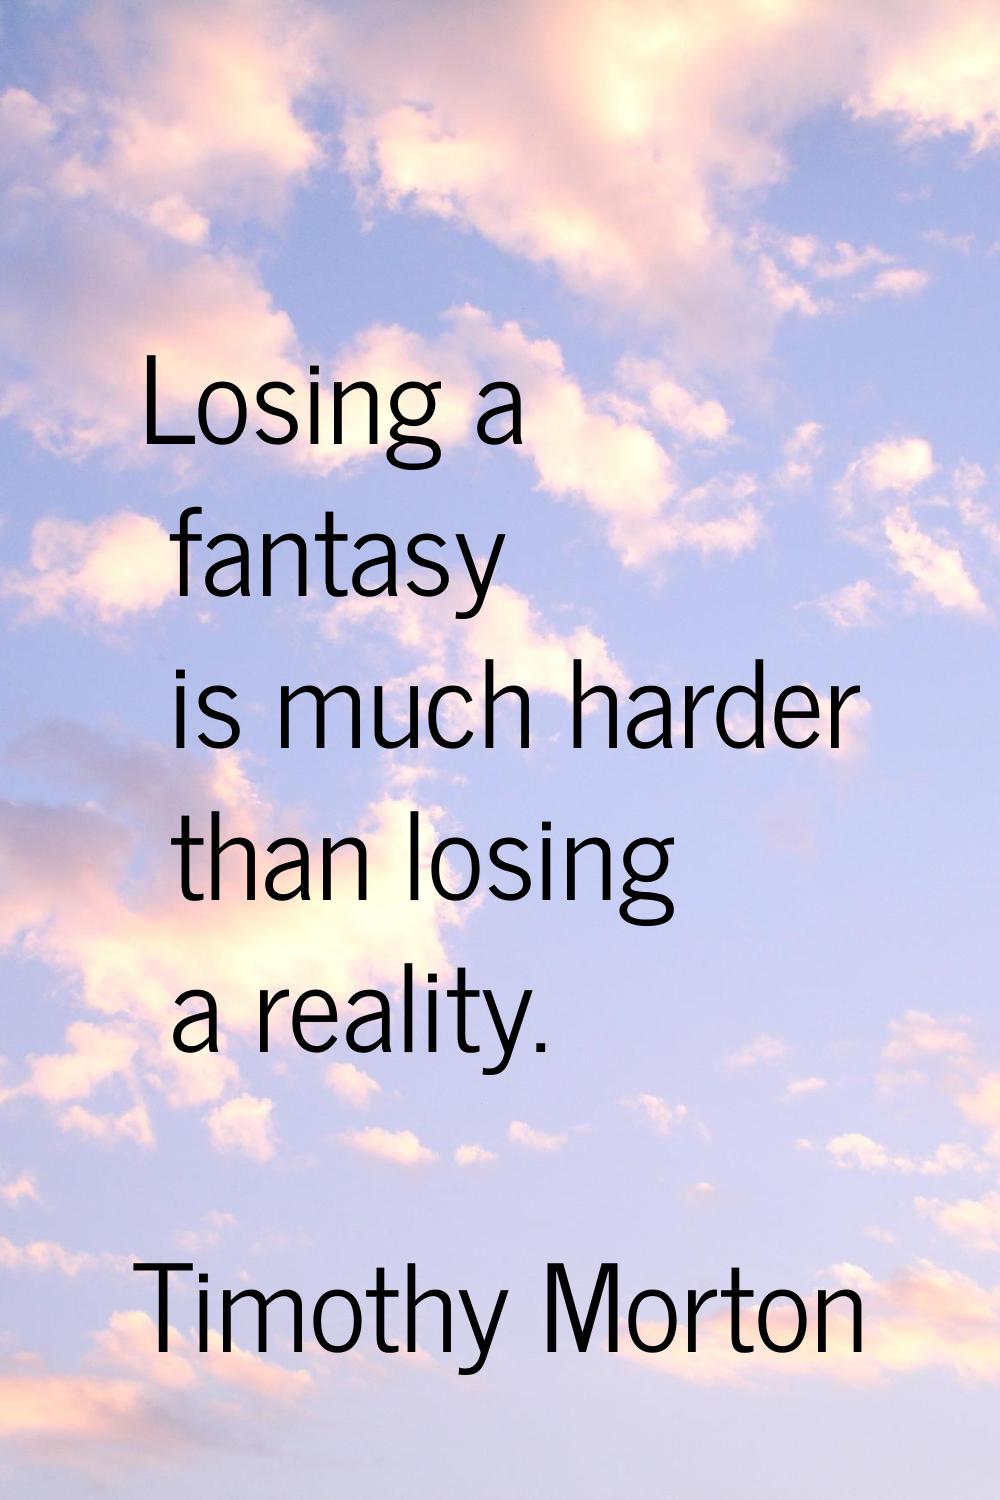 Losing a fantasy is much harder than losing a reality.